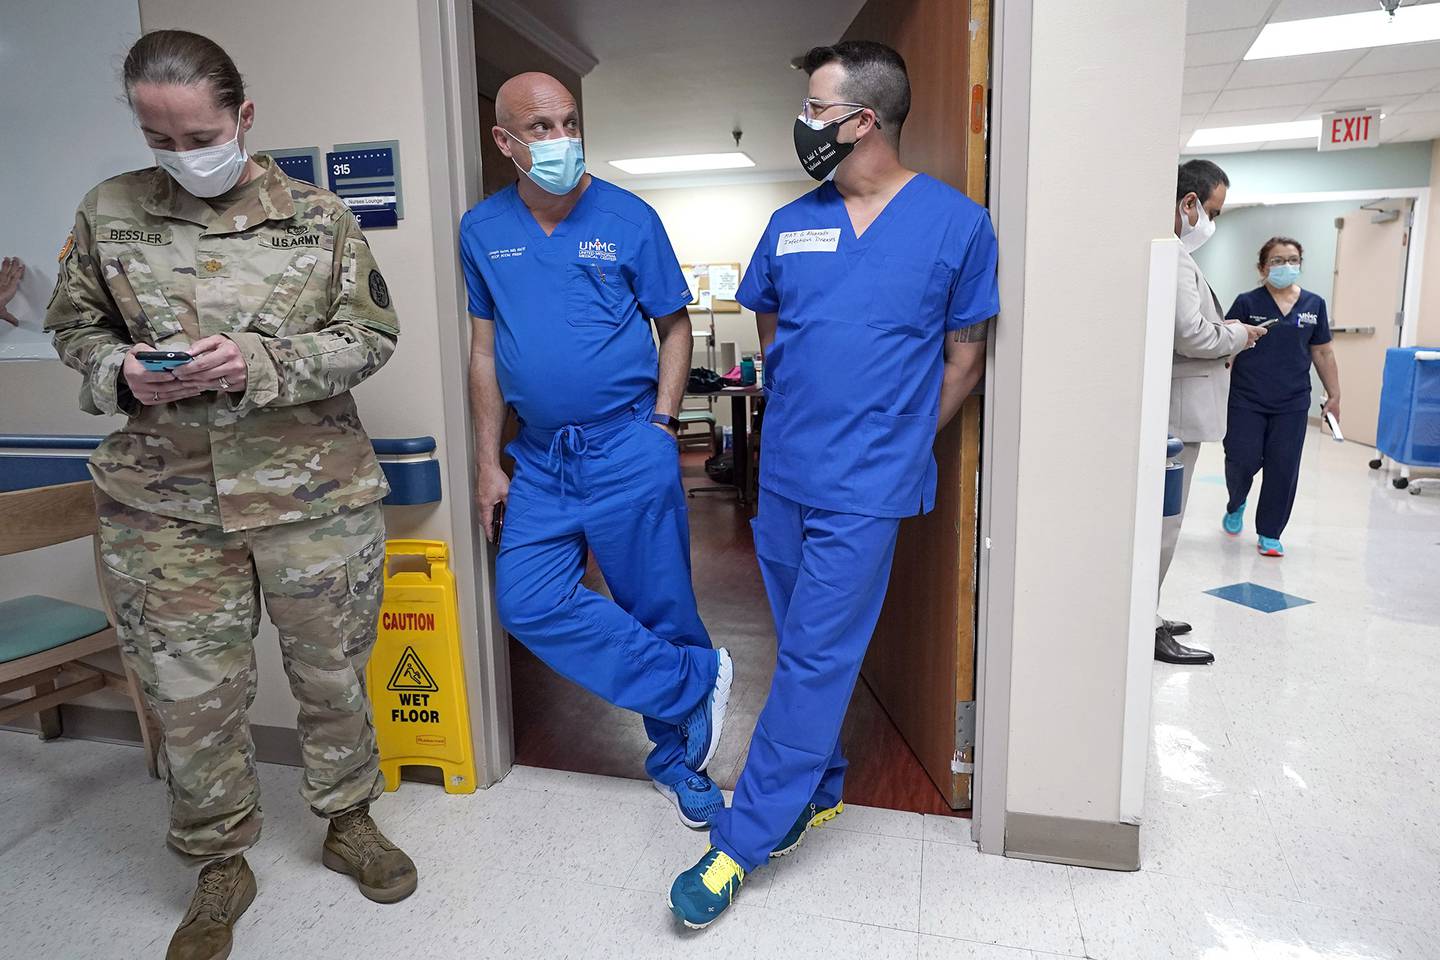 United Memorial Medical Center's Dr. Joesph Varon, center, talks with Infectious Disease Physician Army Maj. Gadiel Alvarado, right, as Maj. Katy Bessler, left, checks her phone as members of the Urban Augmentation Medical Task Force work to setup a wing in the hospital Thursday, July 16, 2020, in Houston.